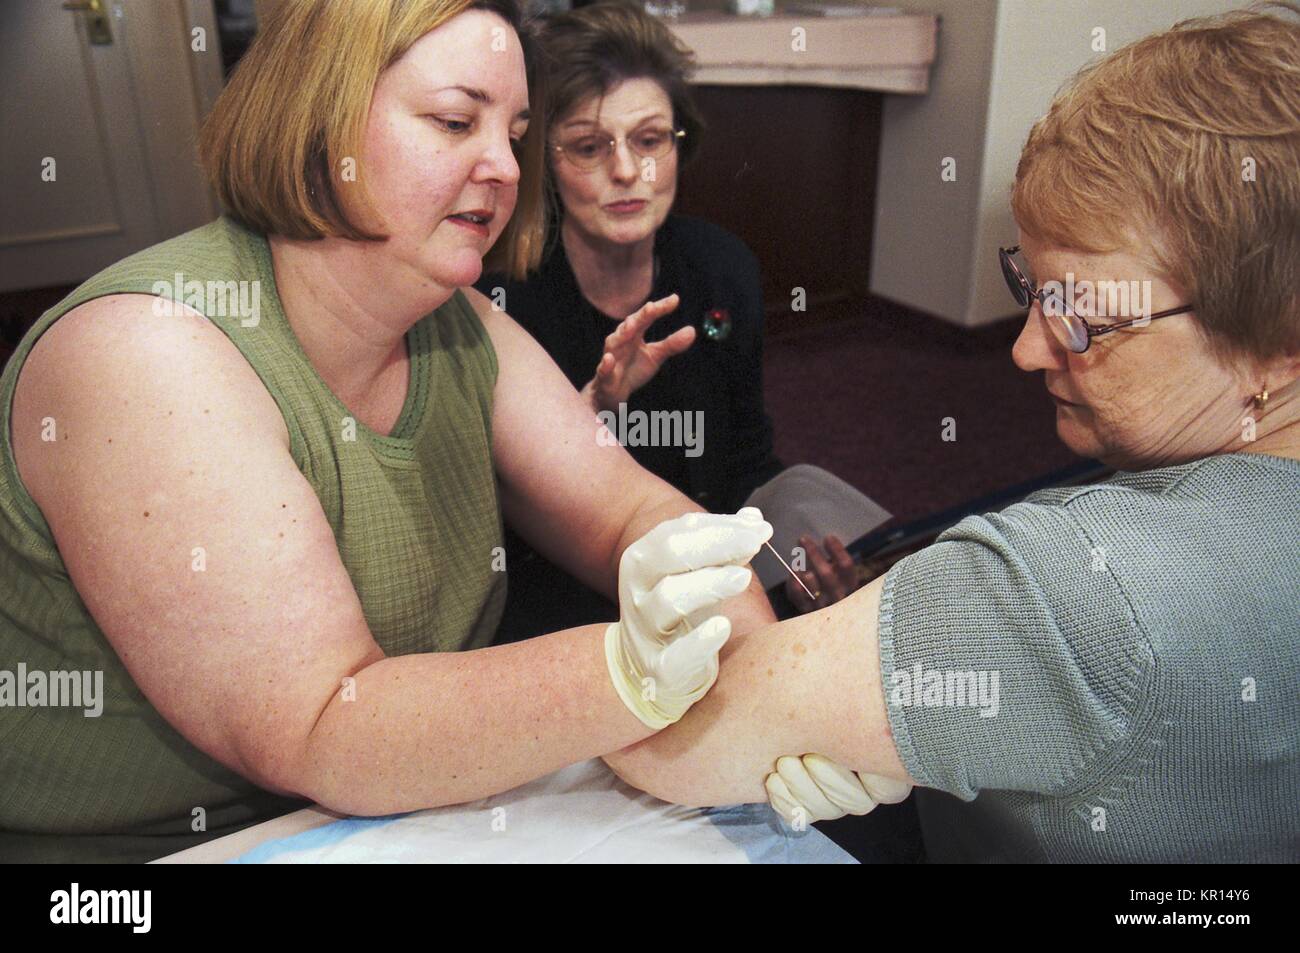 Lorna Will (Left) and Jacqueline Kowalski practice proper technique with a bifurcated needle as trainer Judy Gibson observes, 2002. In December 2002, CDC Clinicians trained state licensed vaccine administers how to deliver smallpox vaccine safely and efficiently. Once training was completed, they provided additional smallpox vaccine administration training in their home states. Image courtesy CDC. Stock Photo